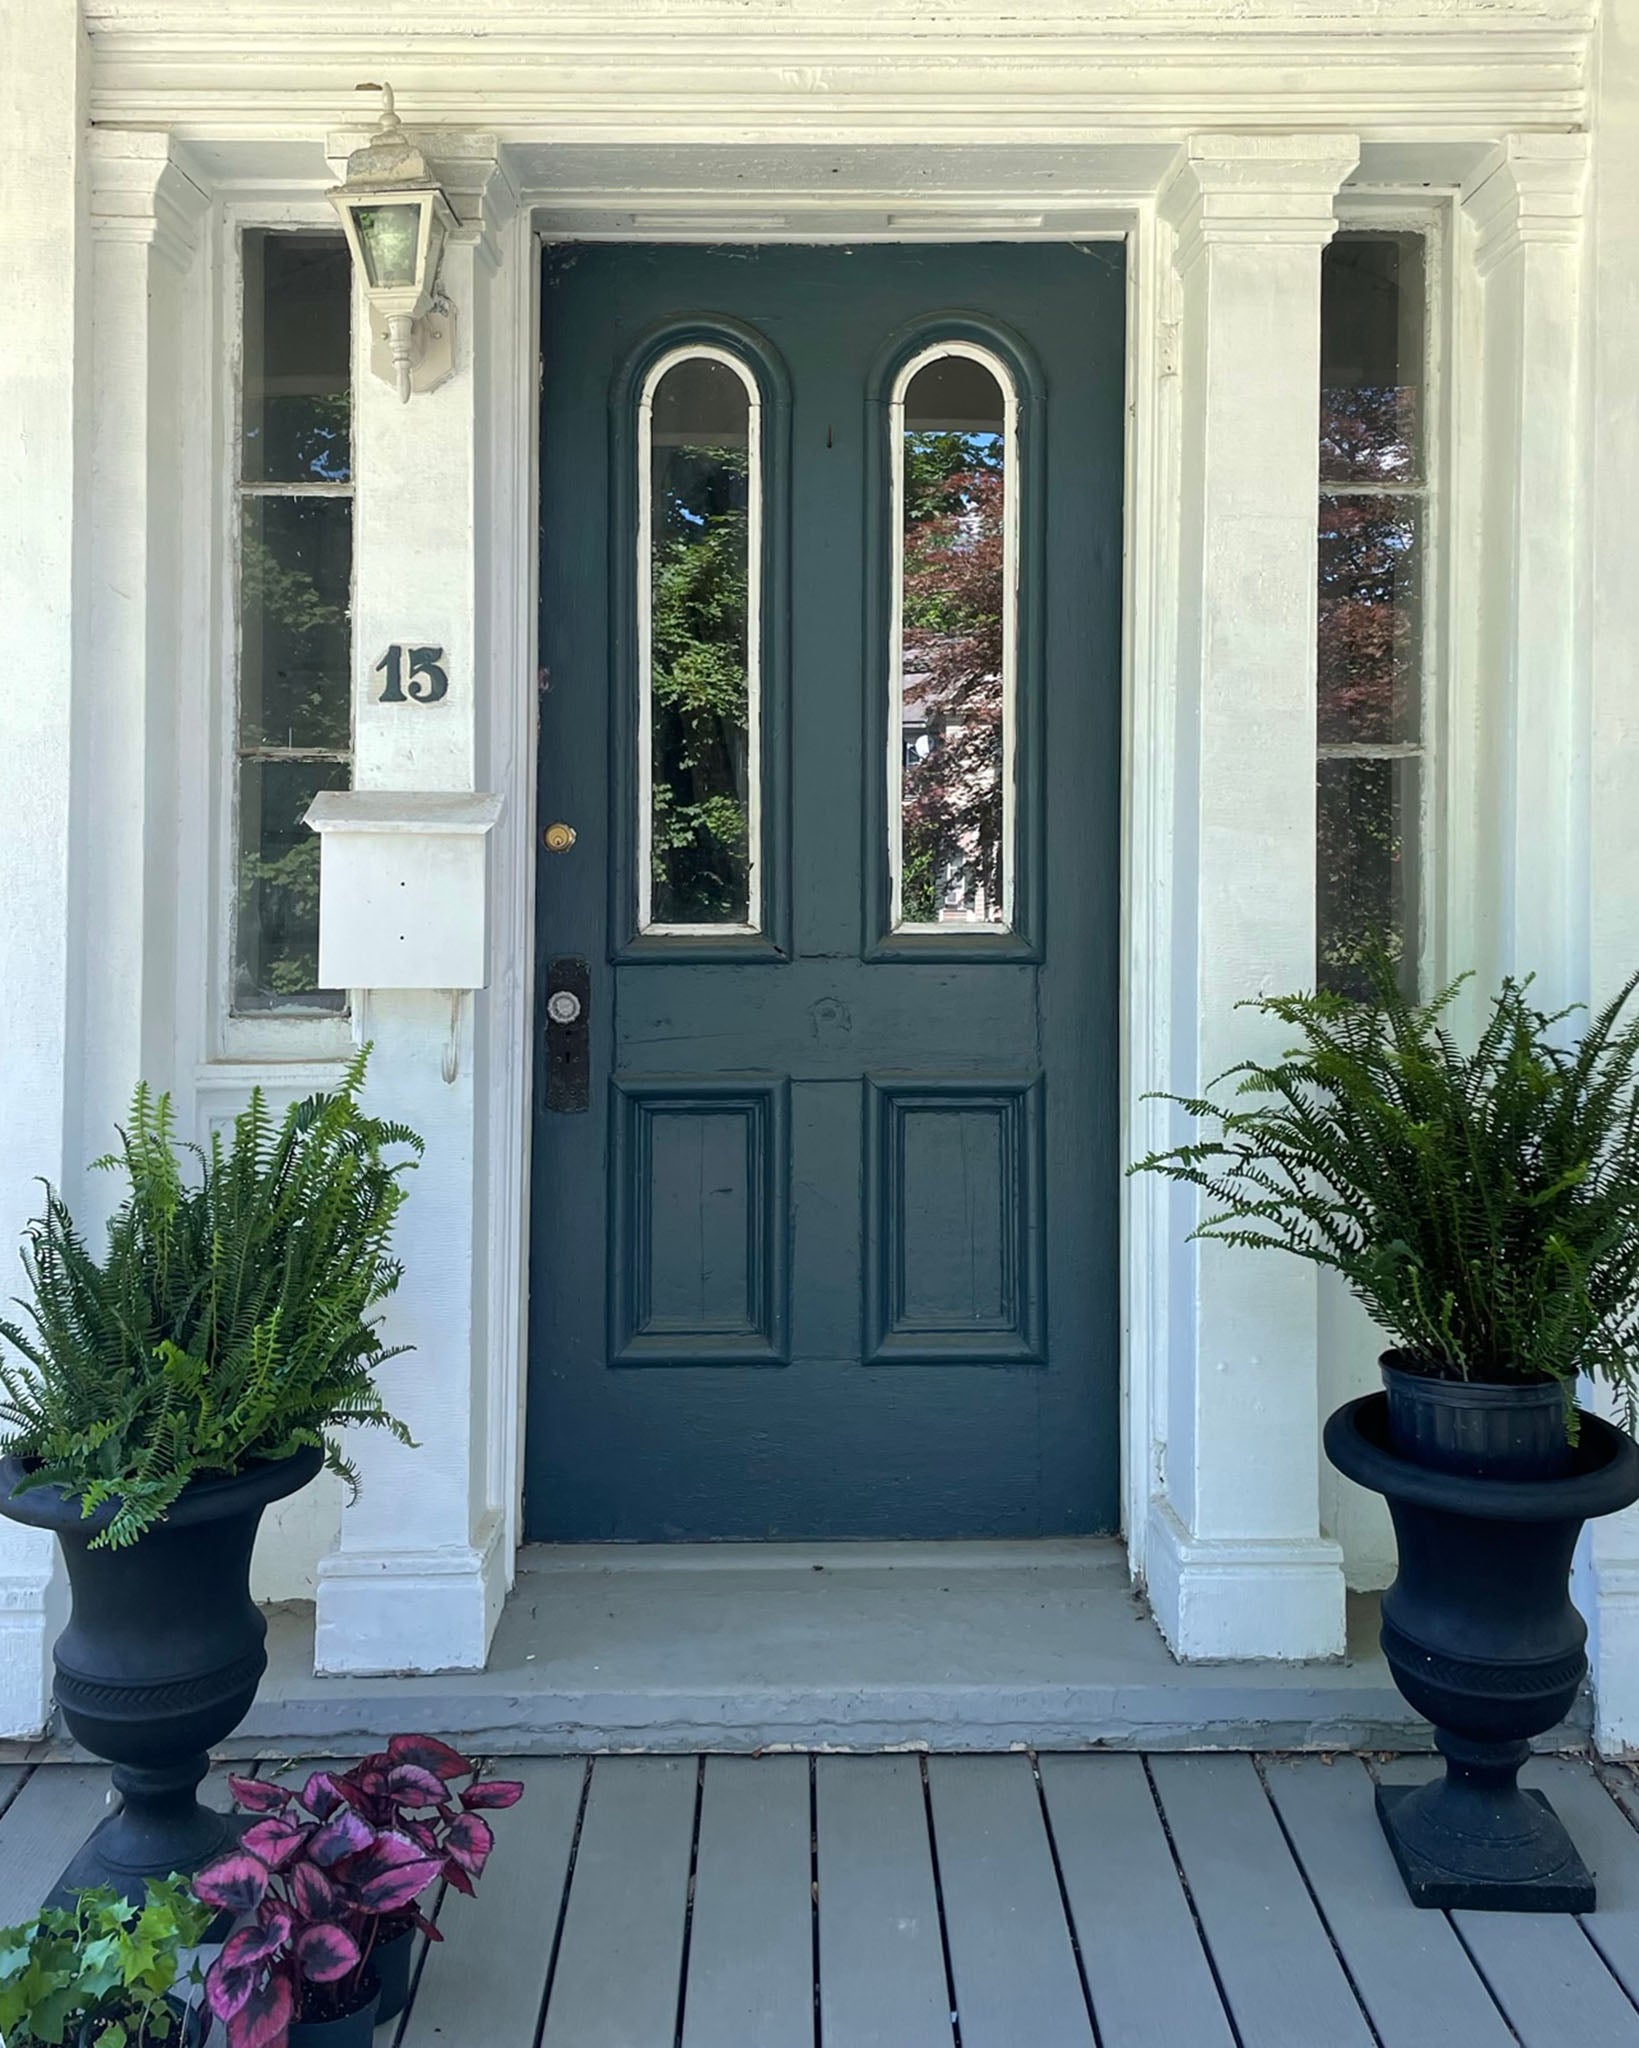 How to paint a front door: Tips for before you paint your front door. How to prep, sand and remove your door from its hinges.